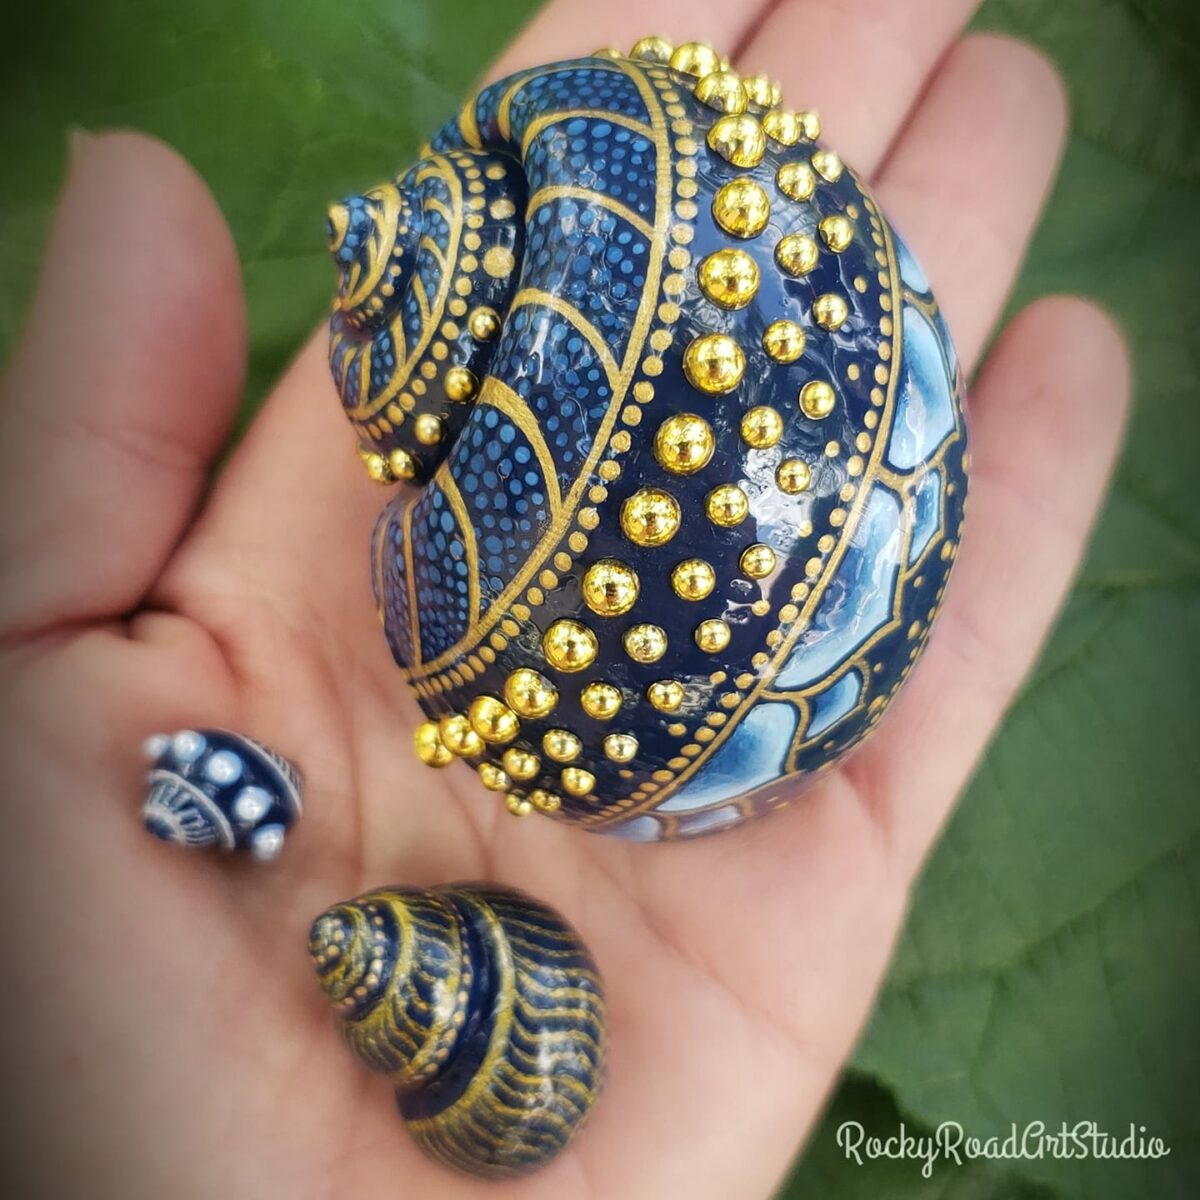 Snail Shells Decorated With Gorgeous Patterns By Lisa Orlans 5